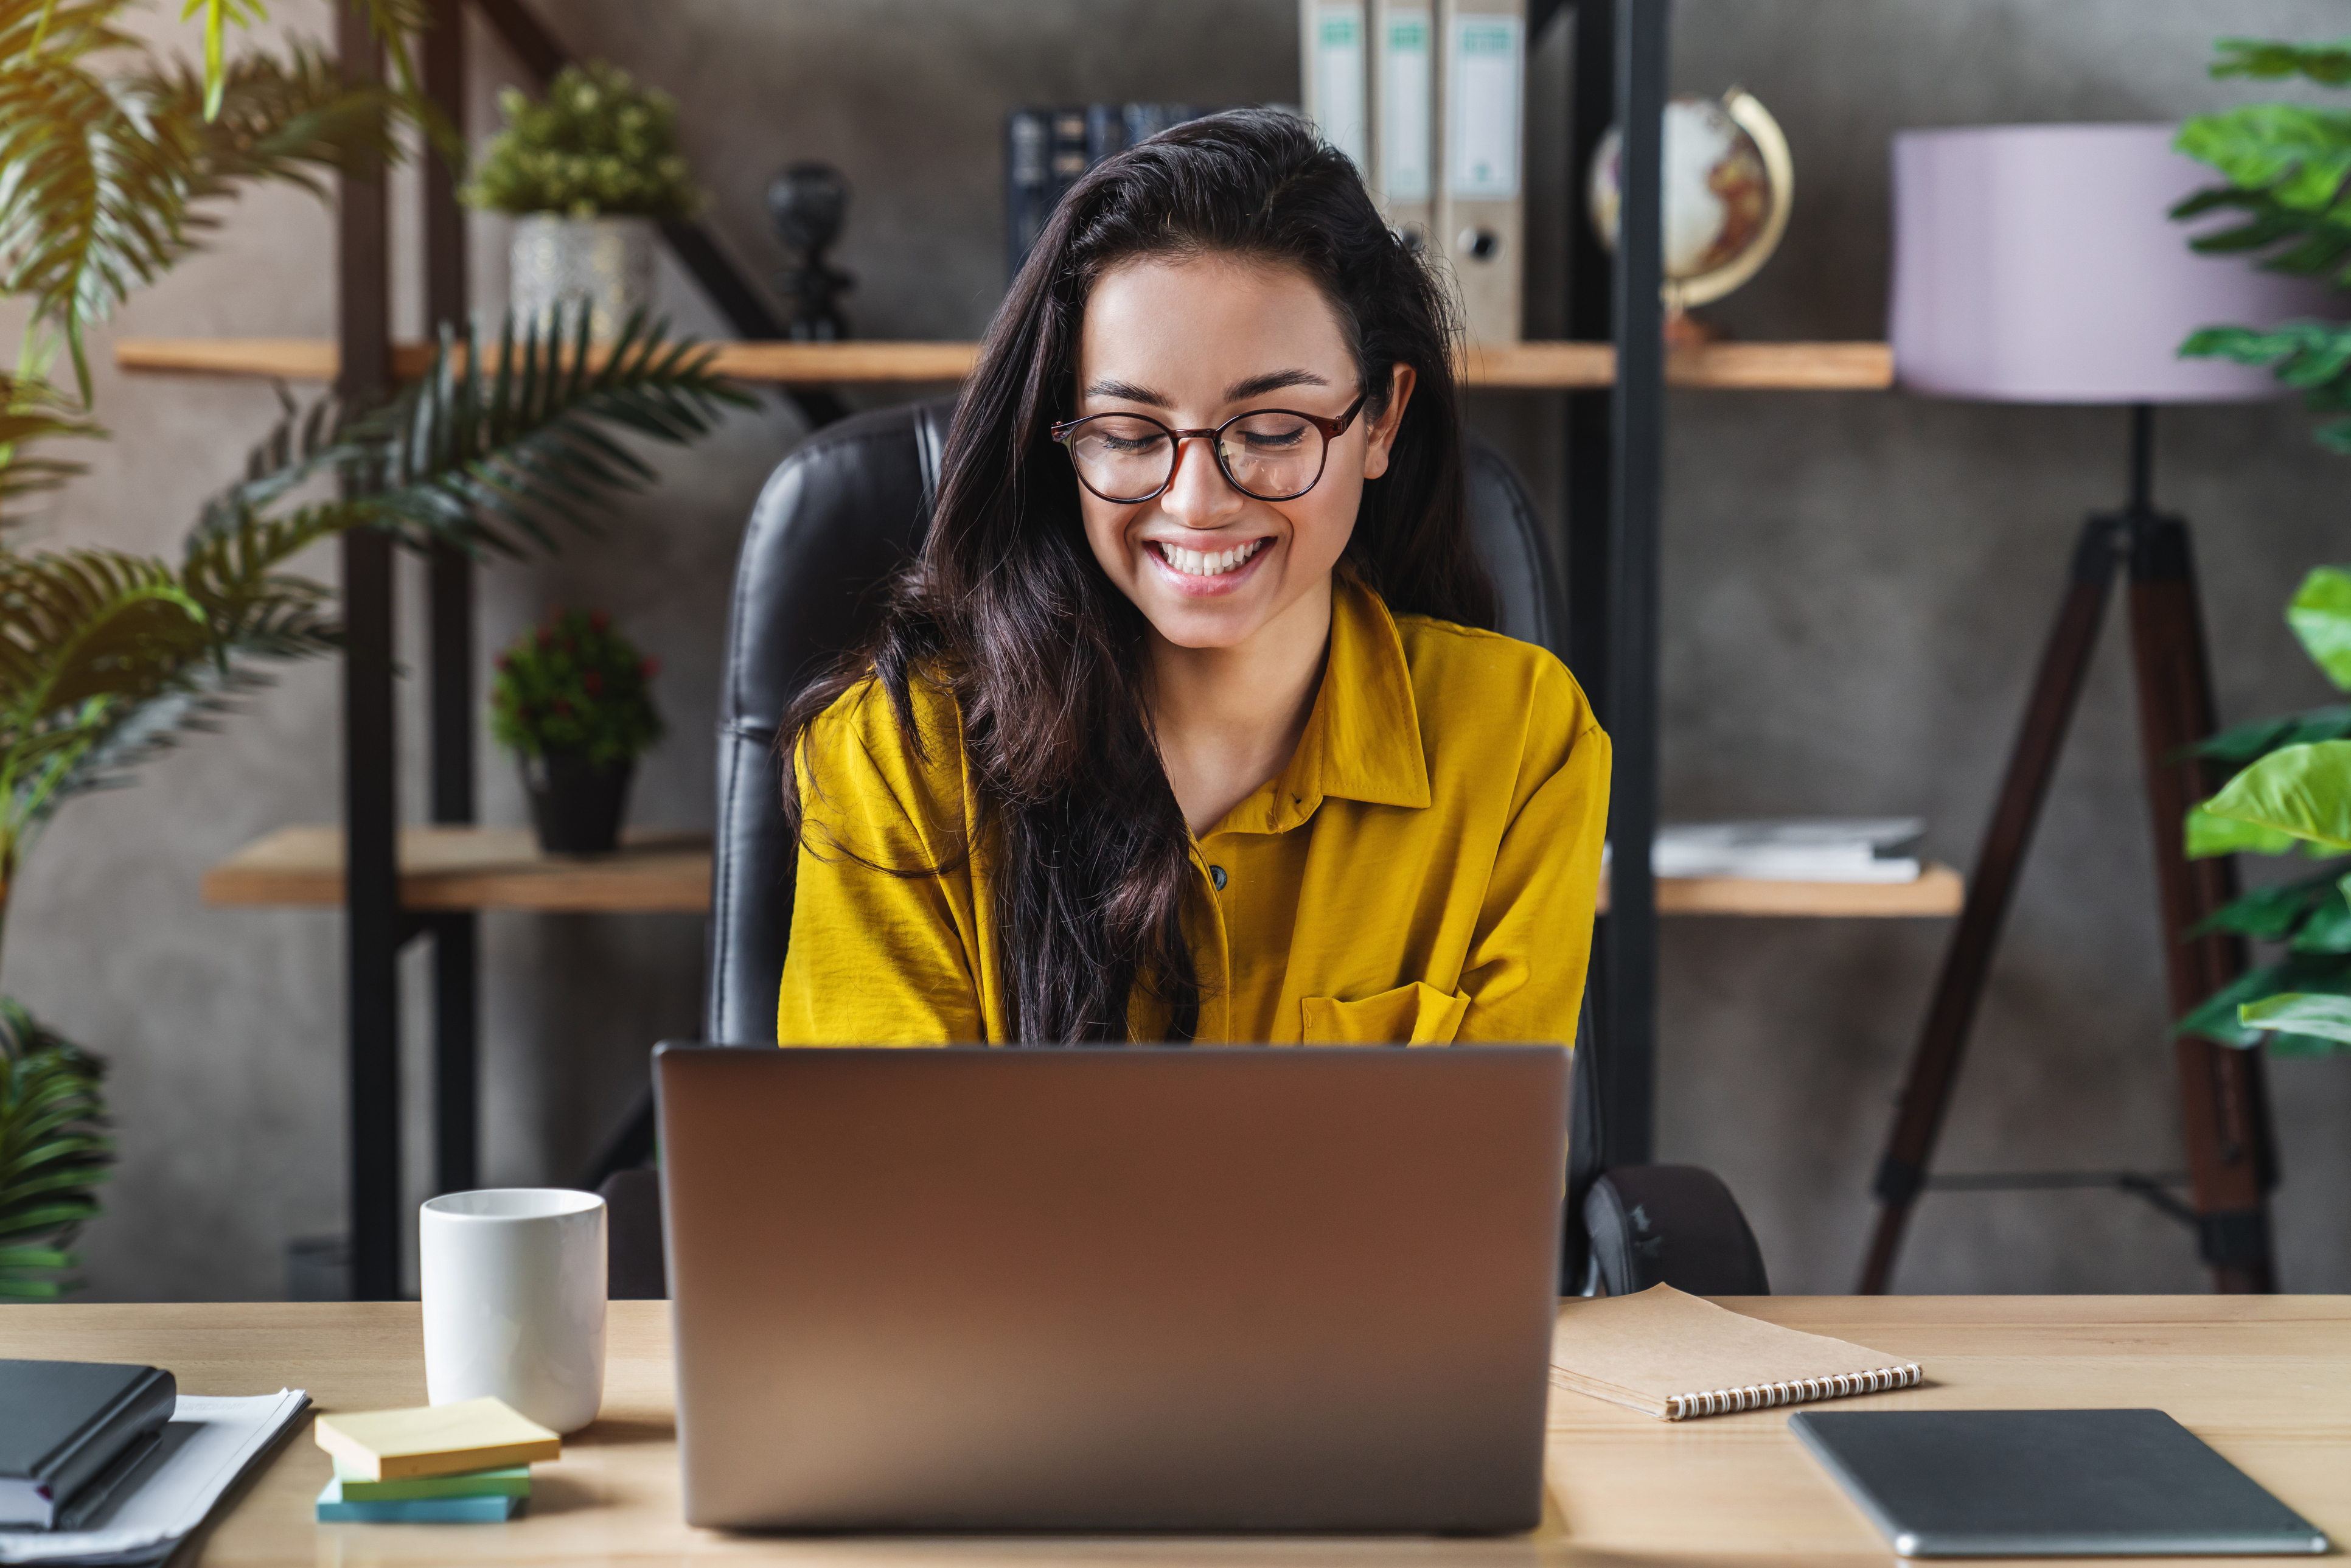 Smiling woman on laptop in office.